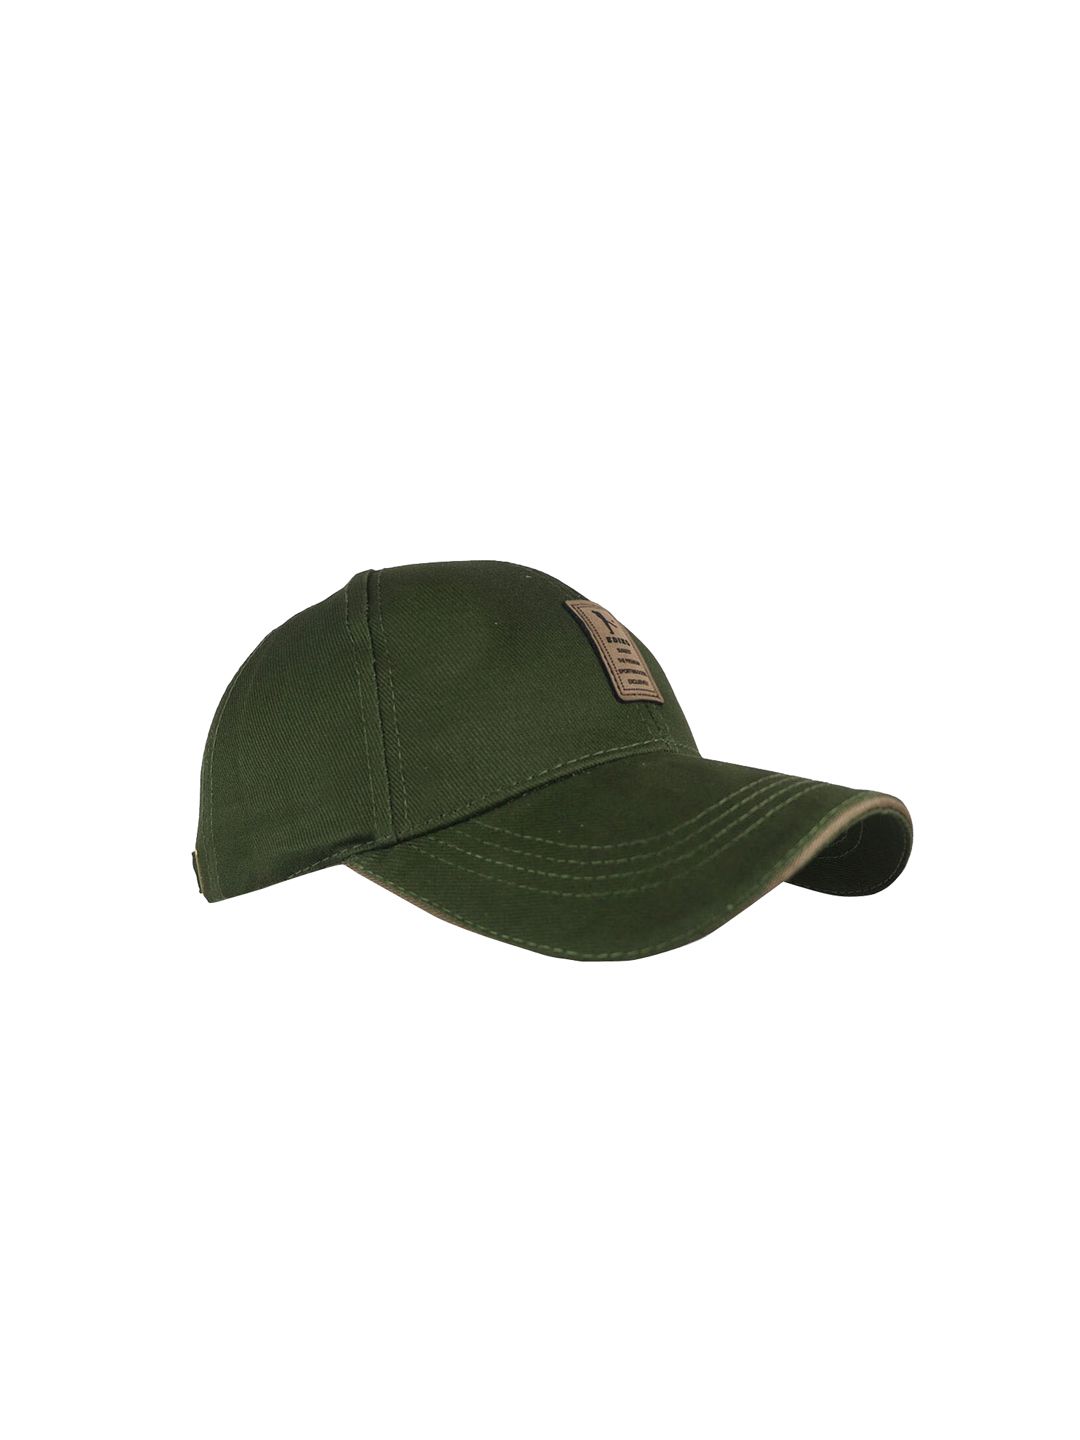 iSWEVEN Unisex Green Solid Snapback Cap Price in India